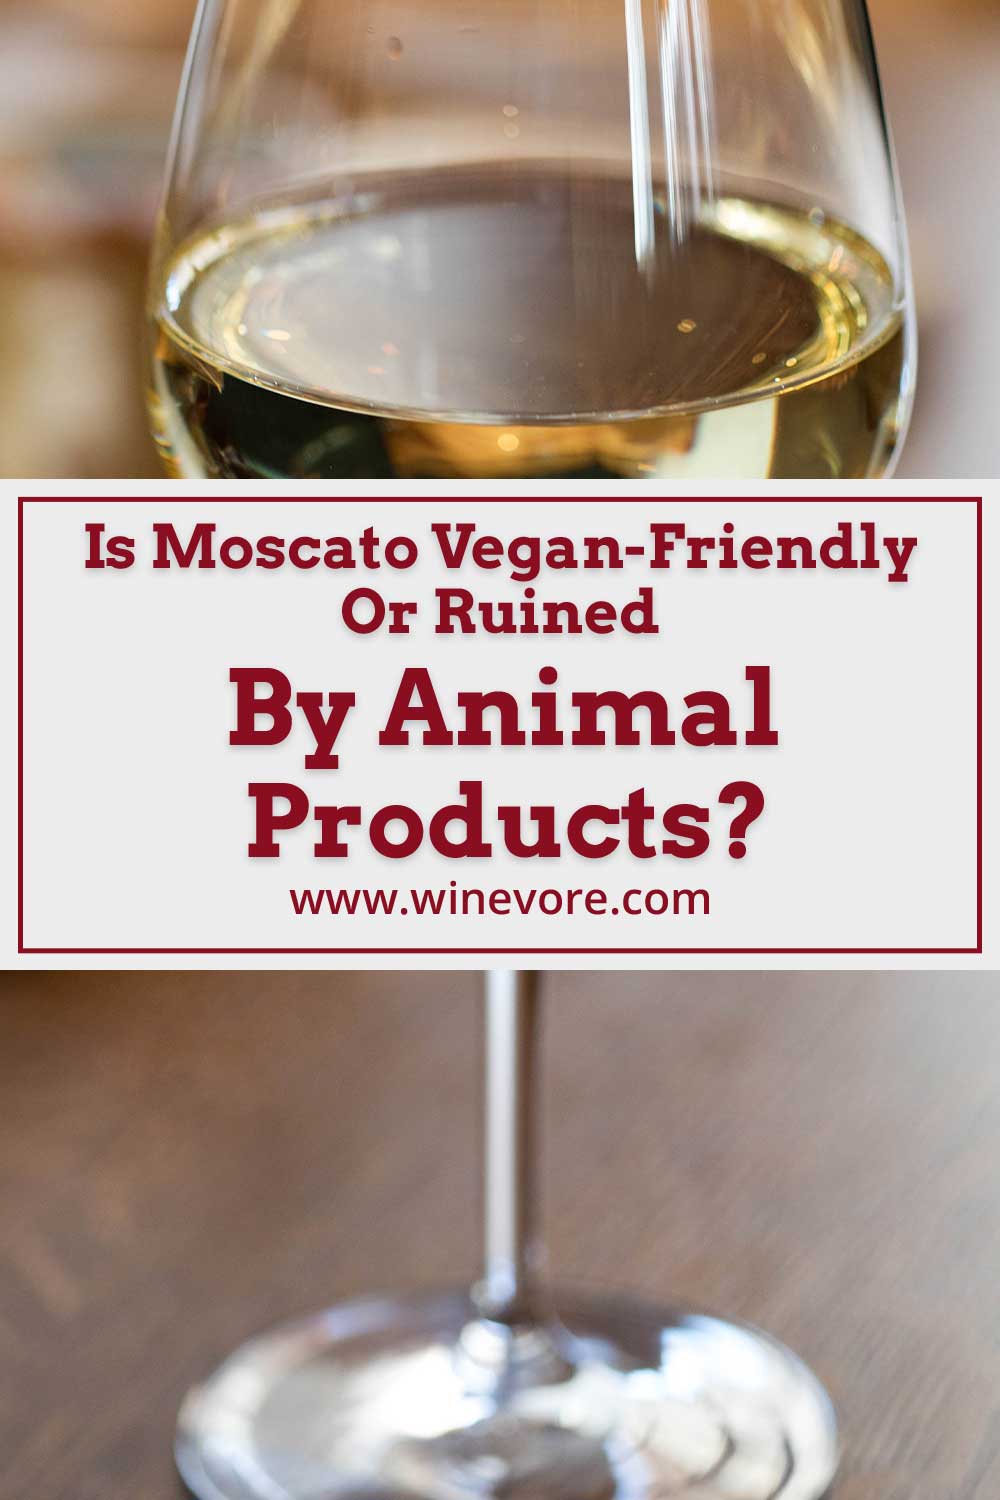 A wine glass on a wooden surface - Is Moscato Vegan-Friendly Or Contains Animal Products?